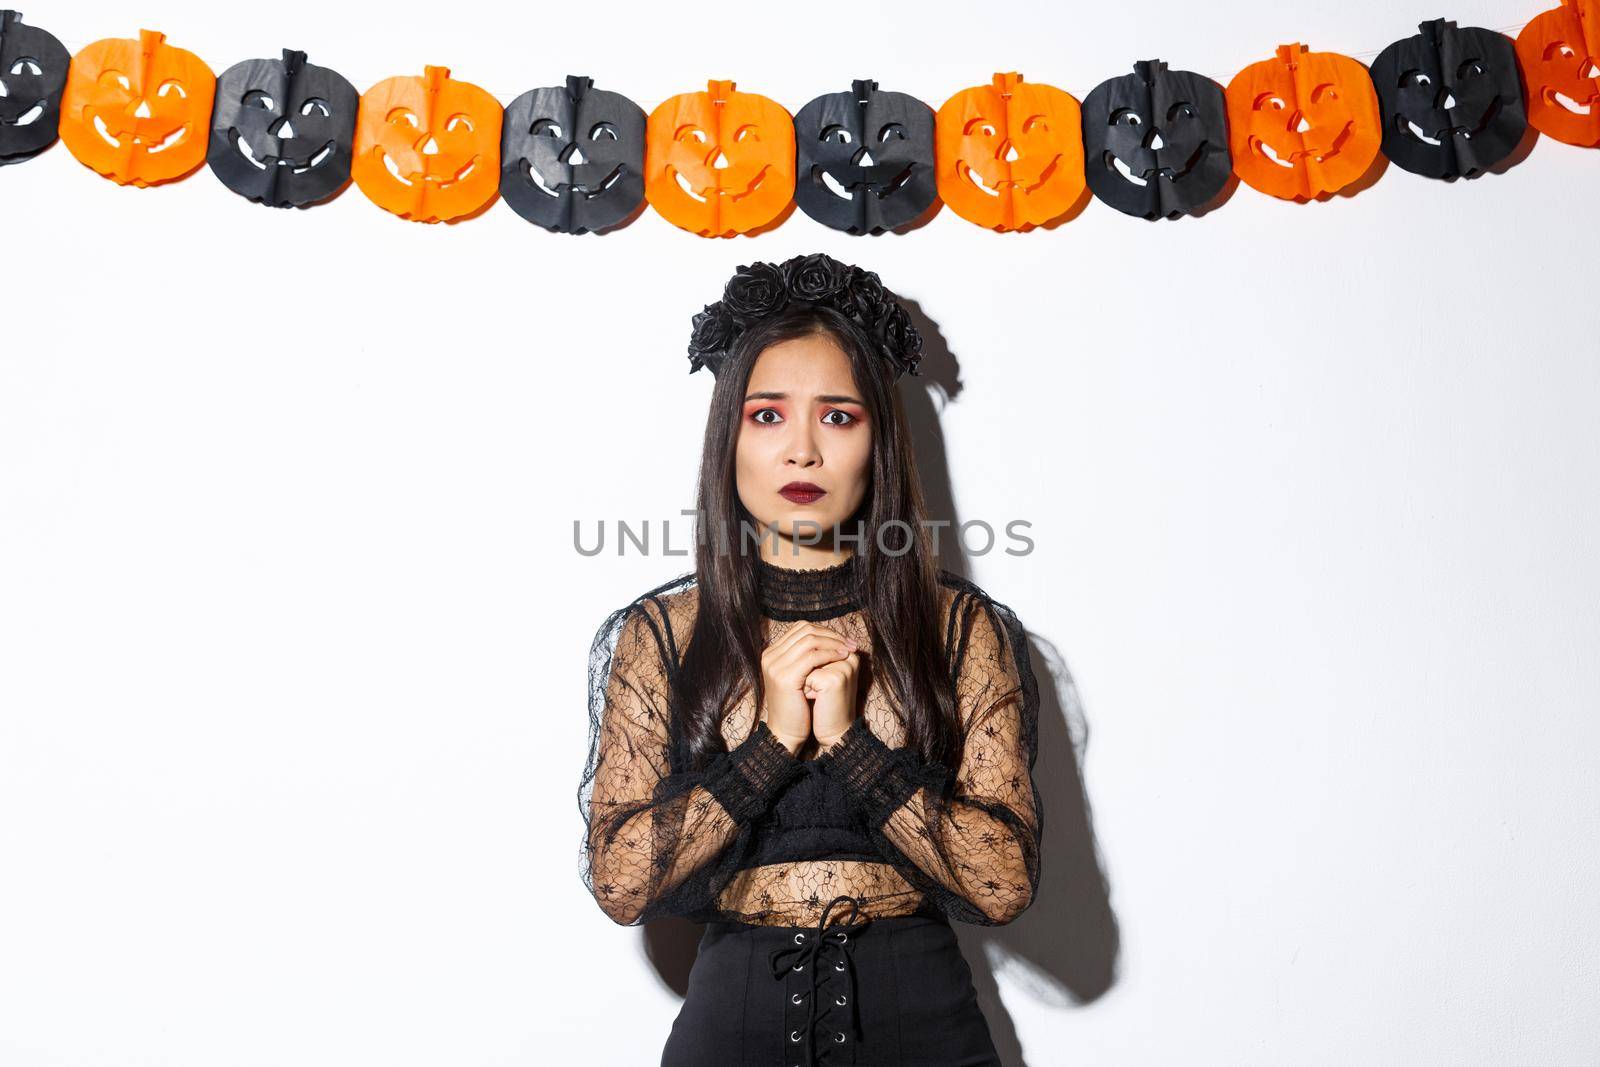 Image of scared and worried asian woman in witch costume looking concerned, wearing witch costume and standing against pumpkin banners.